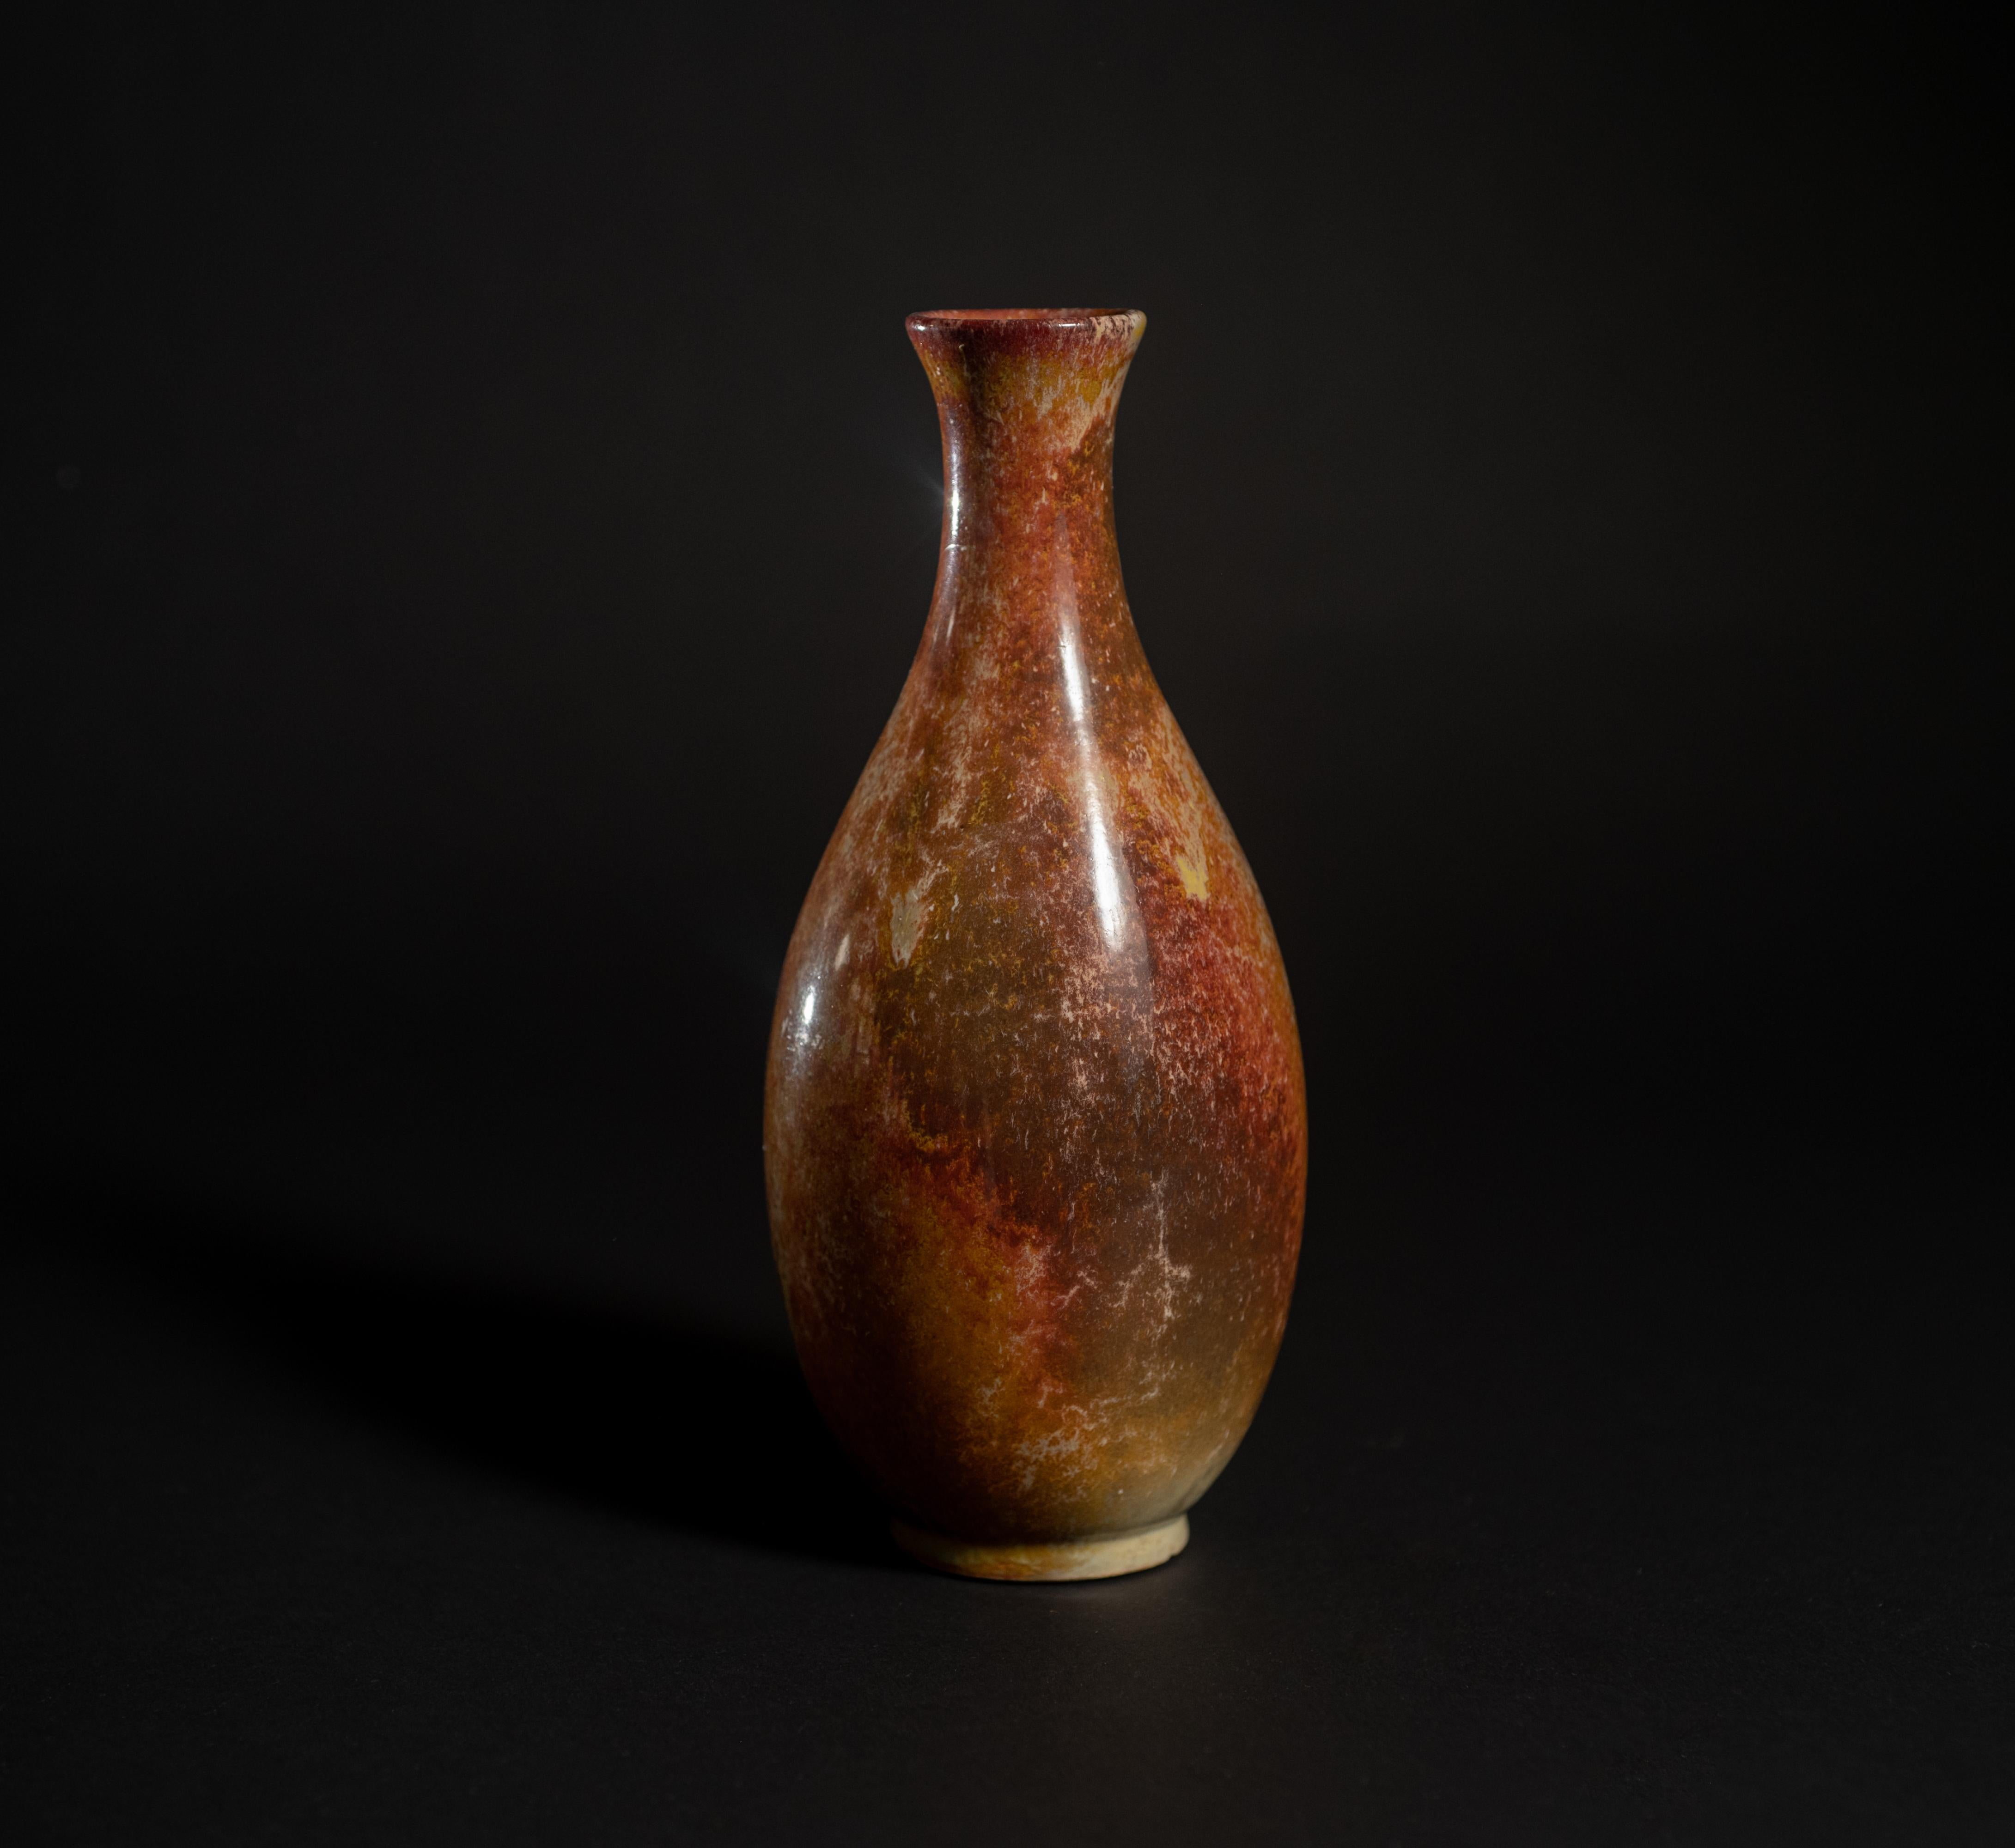 “A Robineau vase is a true work of art, unique in conception and perfect in execution, for every piece that left this studio was a labor of love.” – Ethel Brand Wise, The American Magazine of Art, 1929

Adelaide Alsop Robineau was a pioneer in